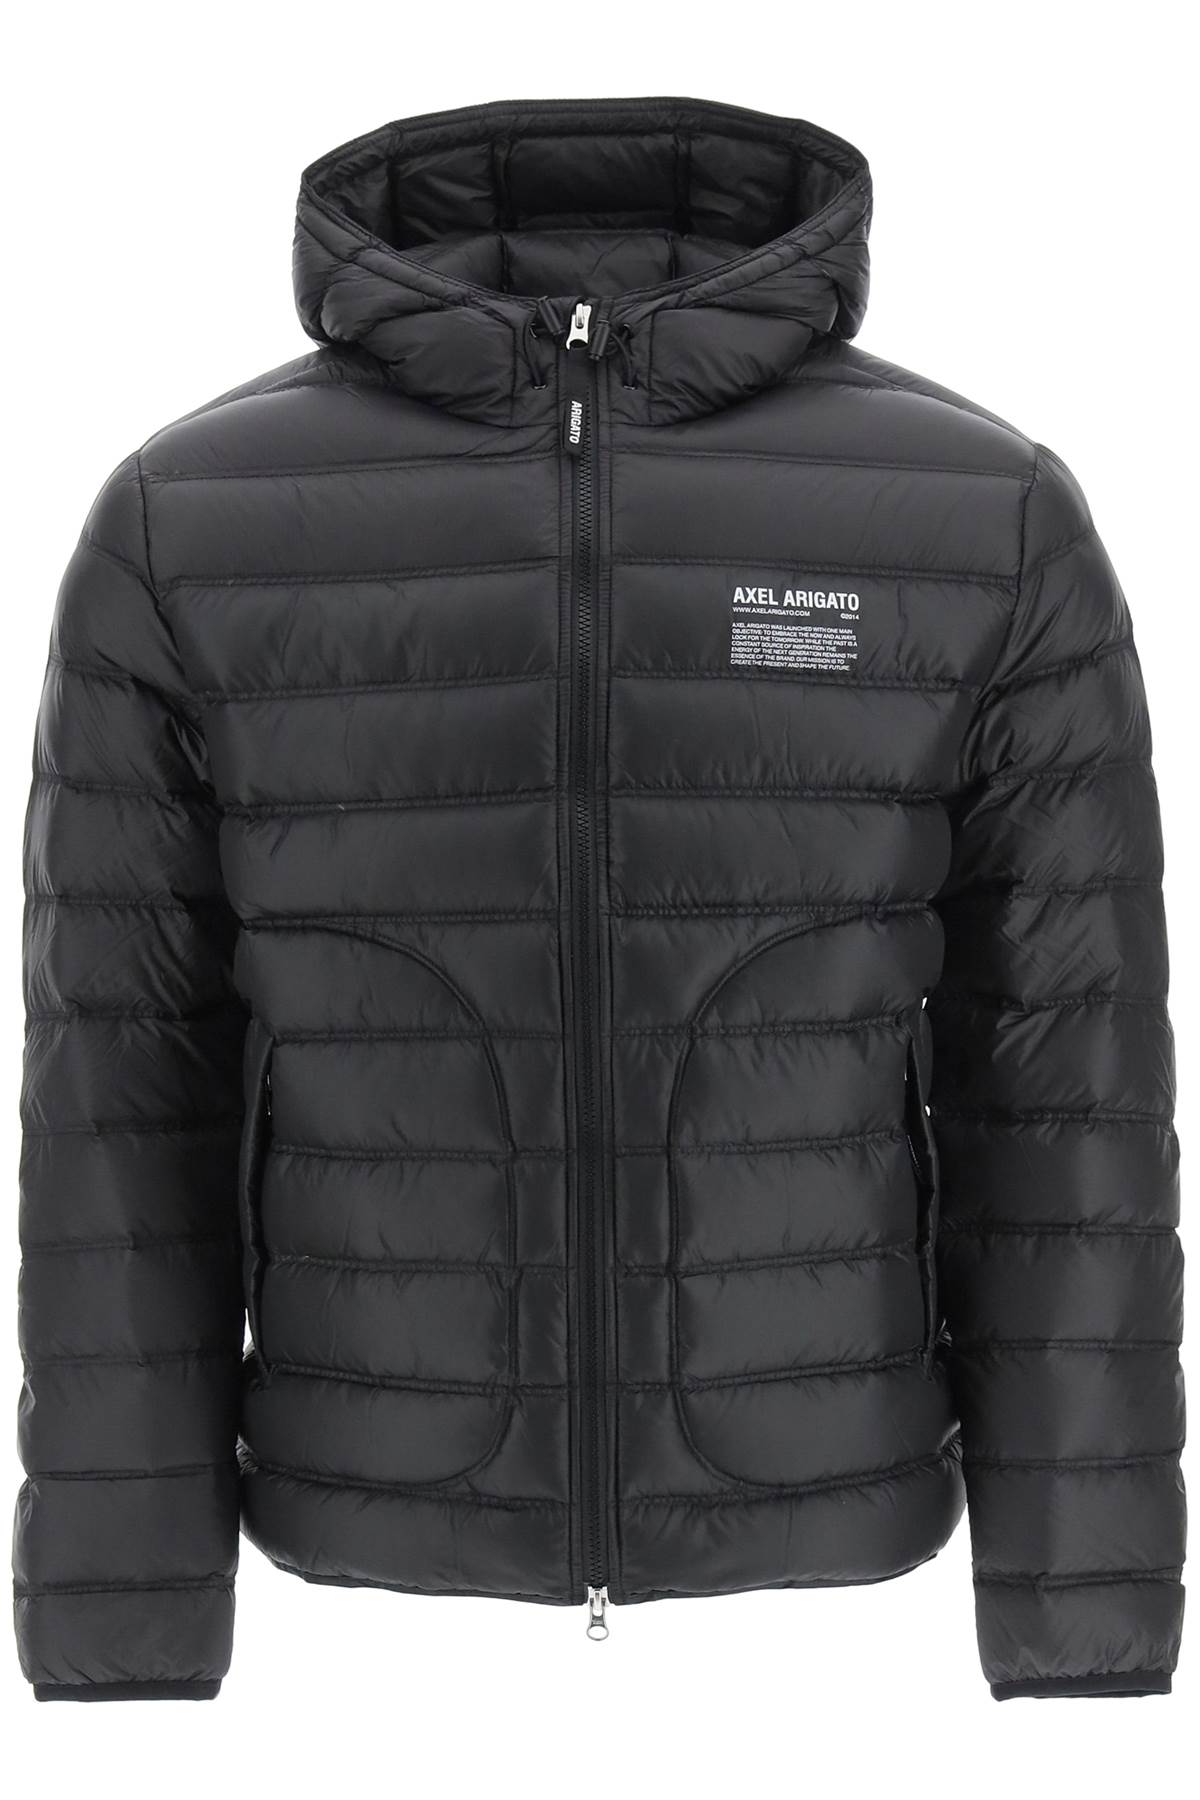 Axel Arigato Hyde Hooded Down Jacket